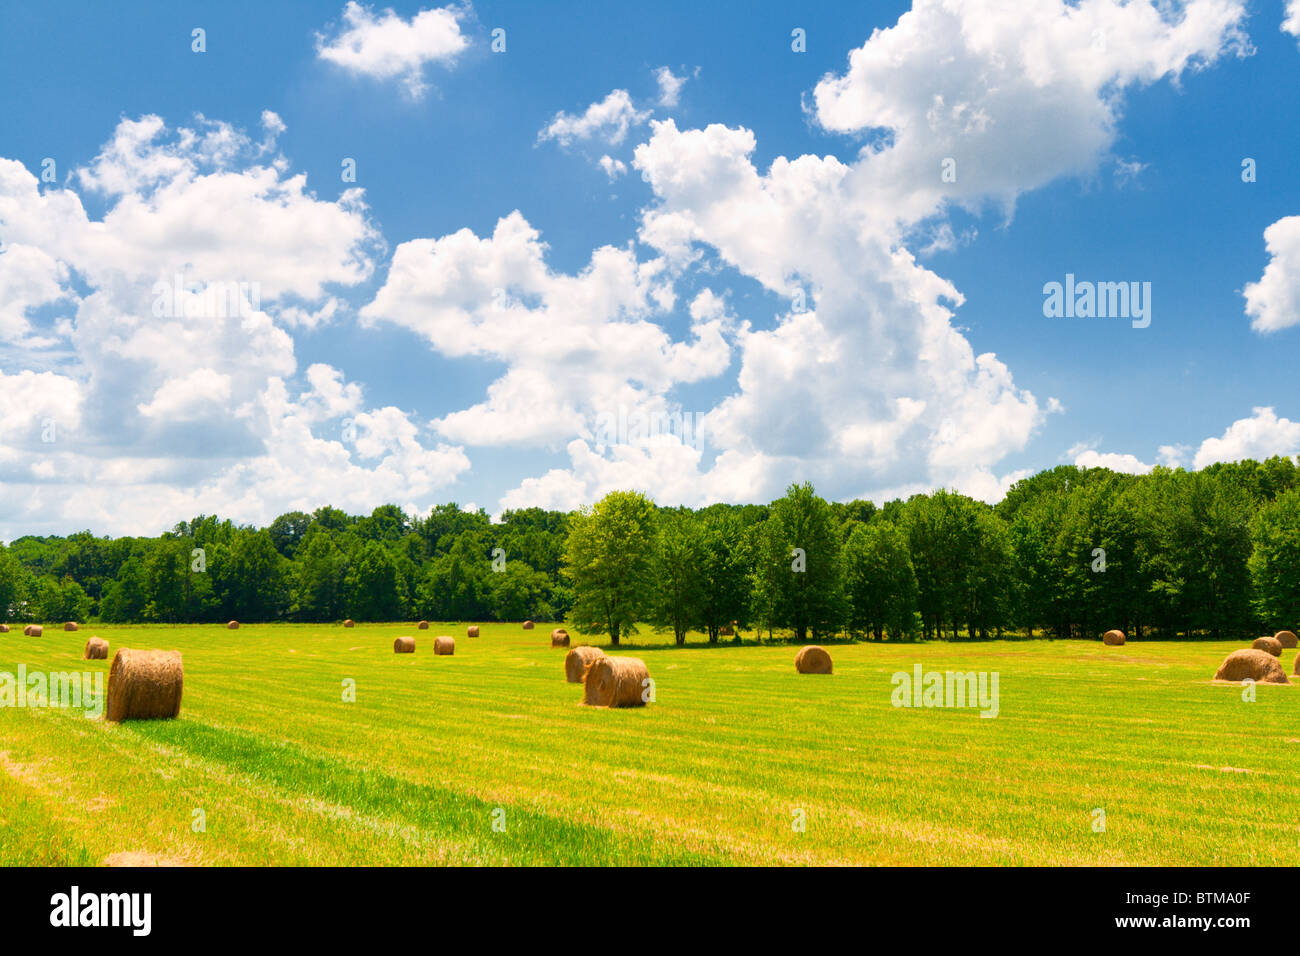 Hay bales in a green field with cloudy skies Stock Photo